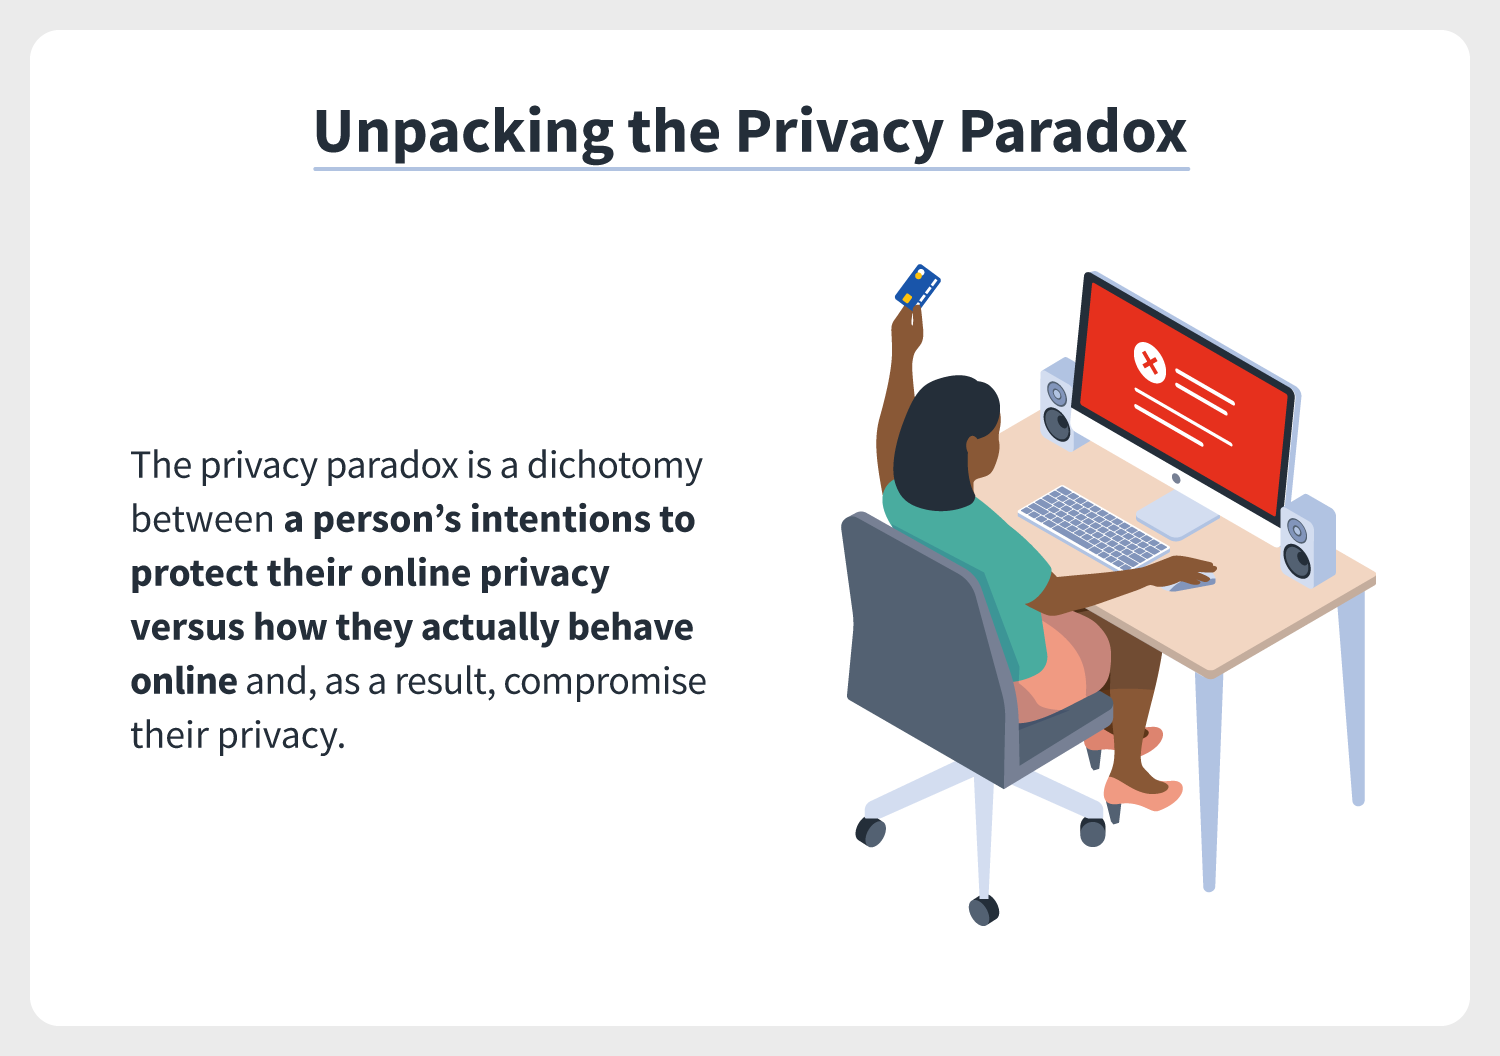 a definition of the privacy paradox: a dichotomy between a person’s intentions to protect their online privacy versus how they actually behave online and, as a result, compromise their privacy